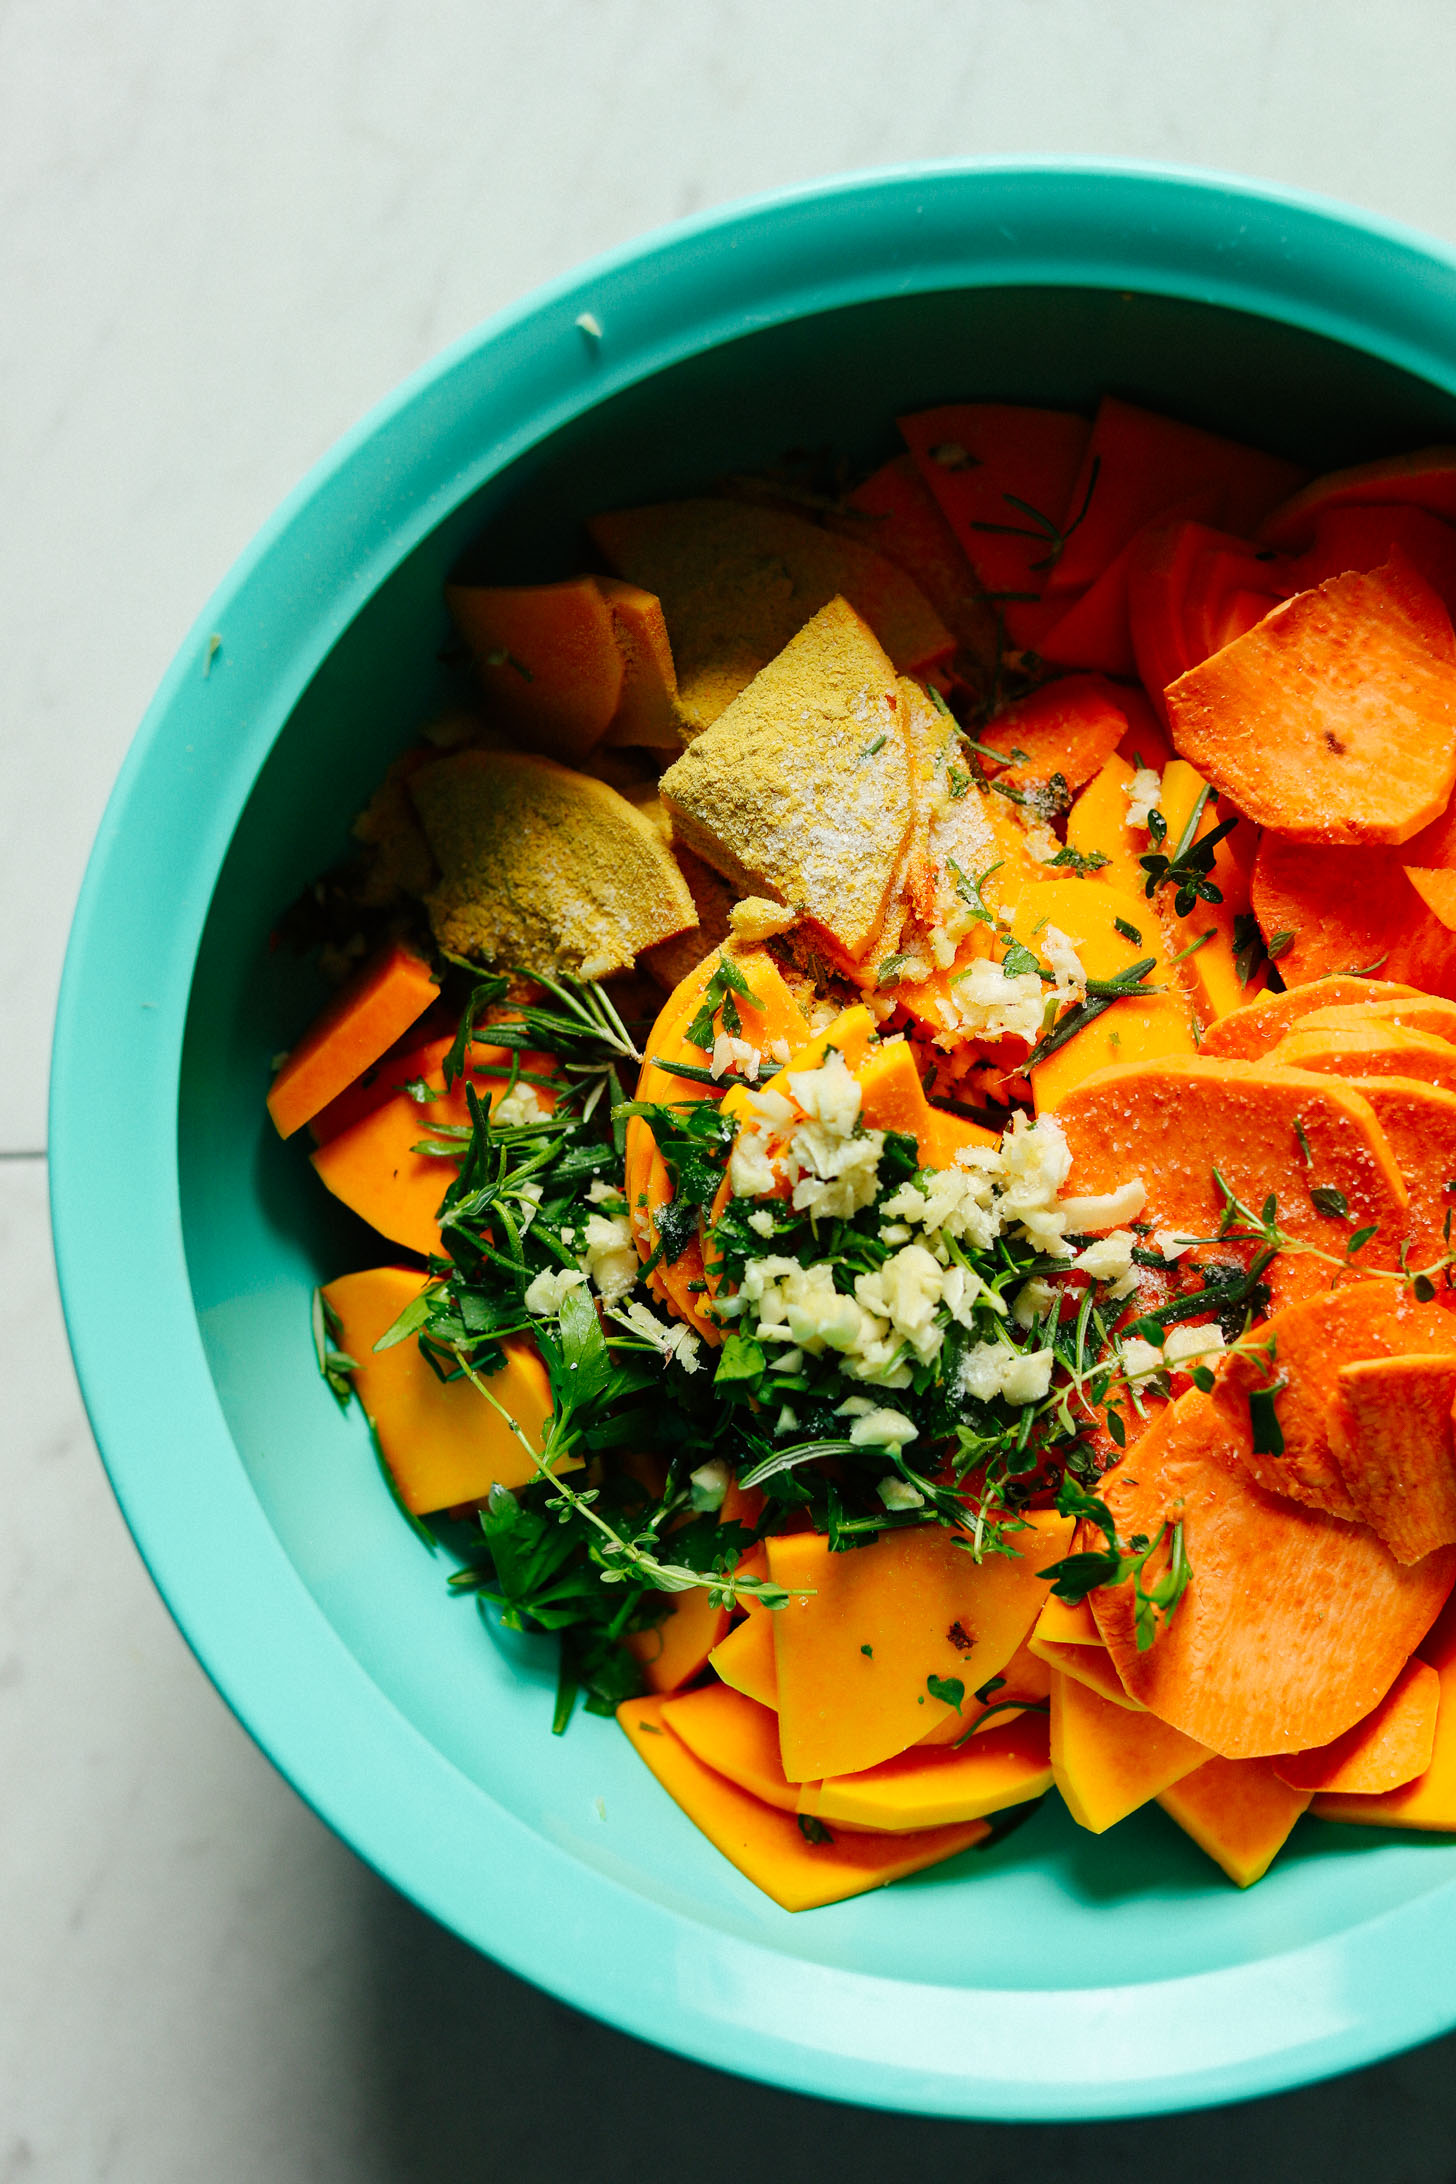 A big blue mixing bowl filled with thinly sliced squash and sweet potato, garlic, fresh herbs, and nutritional yeast